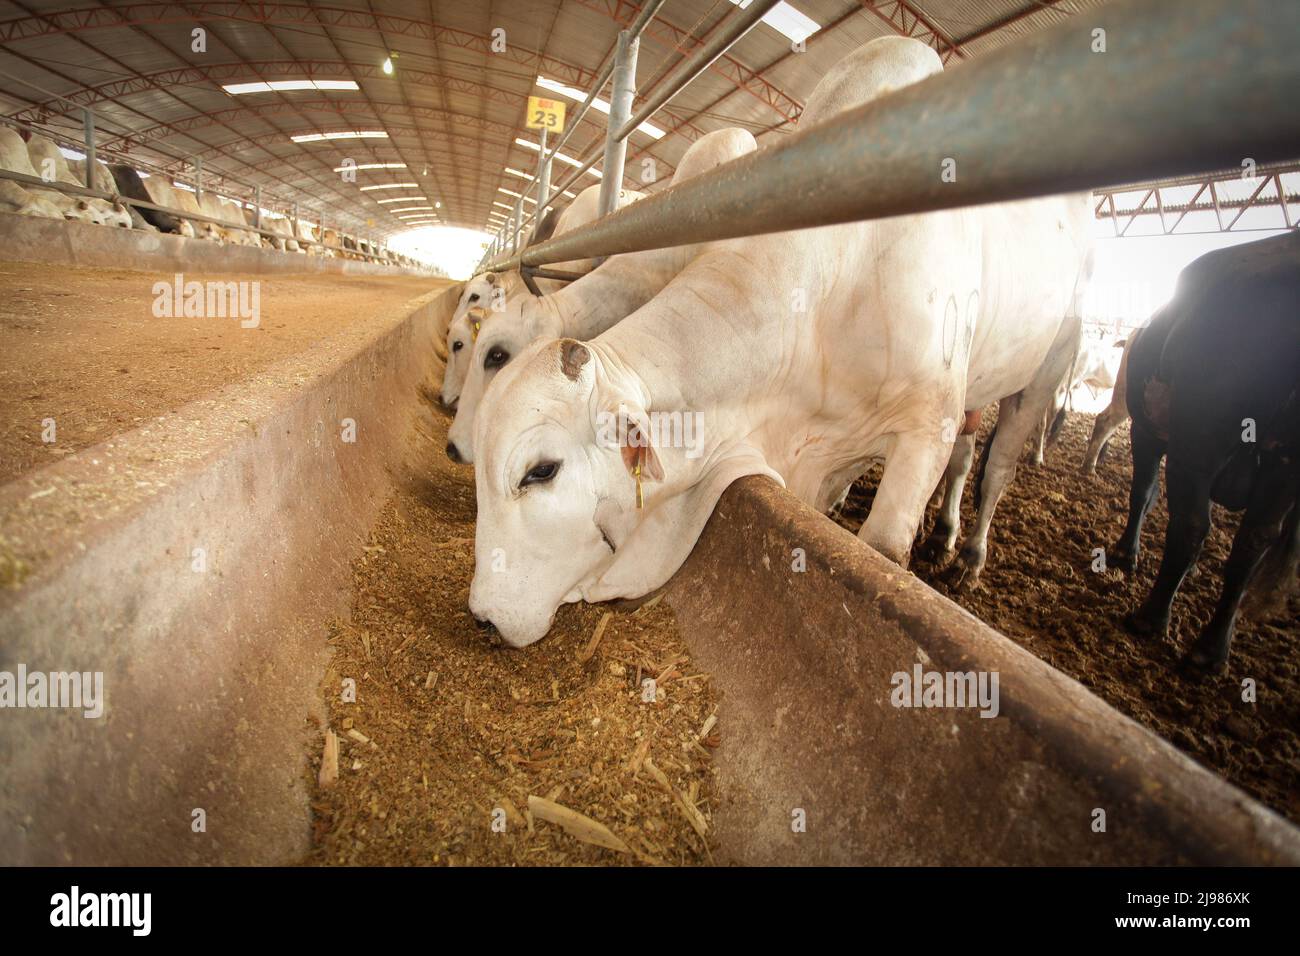 Cattle farm in North Brazil, Pará State, Amazon. Cows eating silage. Stock Photo